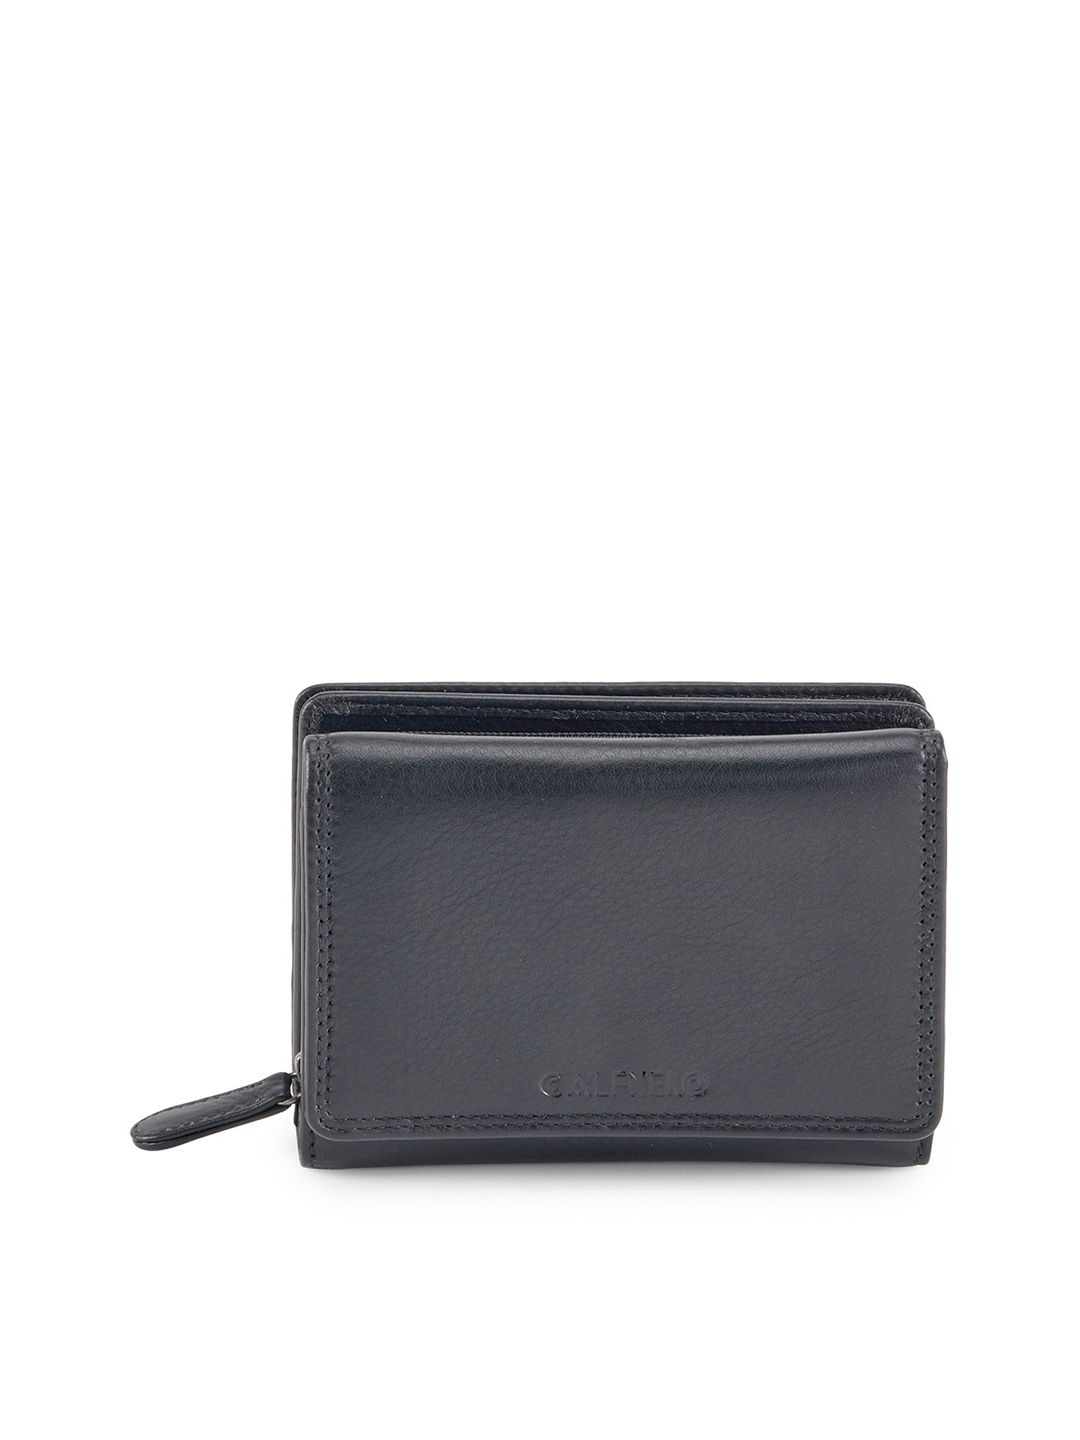 CALFNERO Women Black Solid Two Fold Wallet Price in India